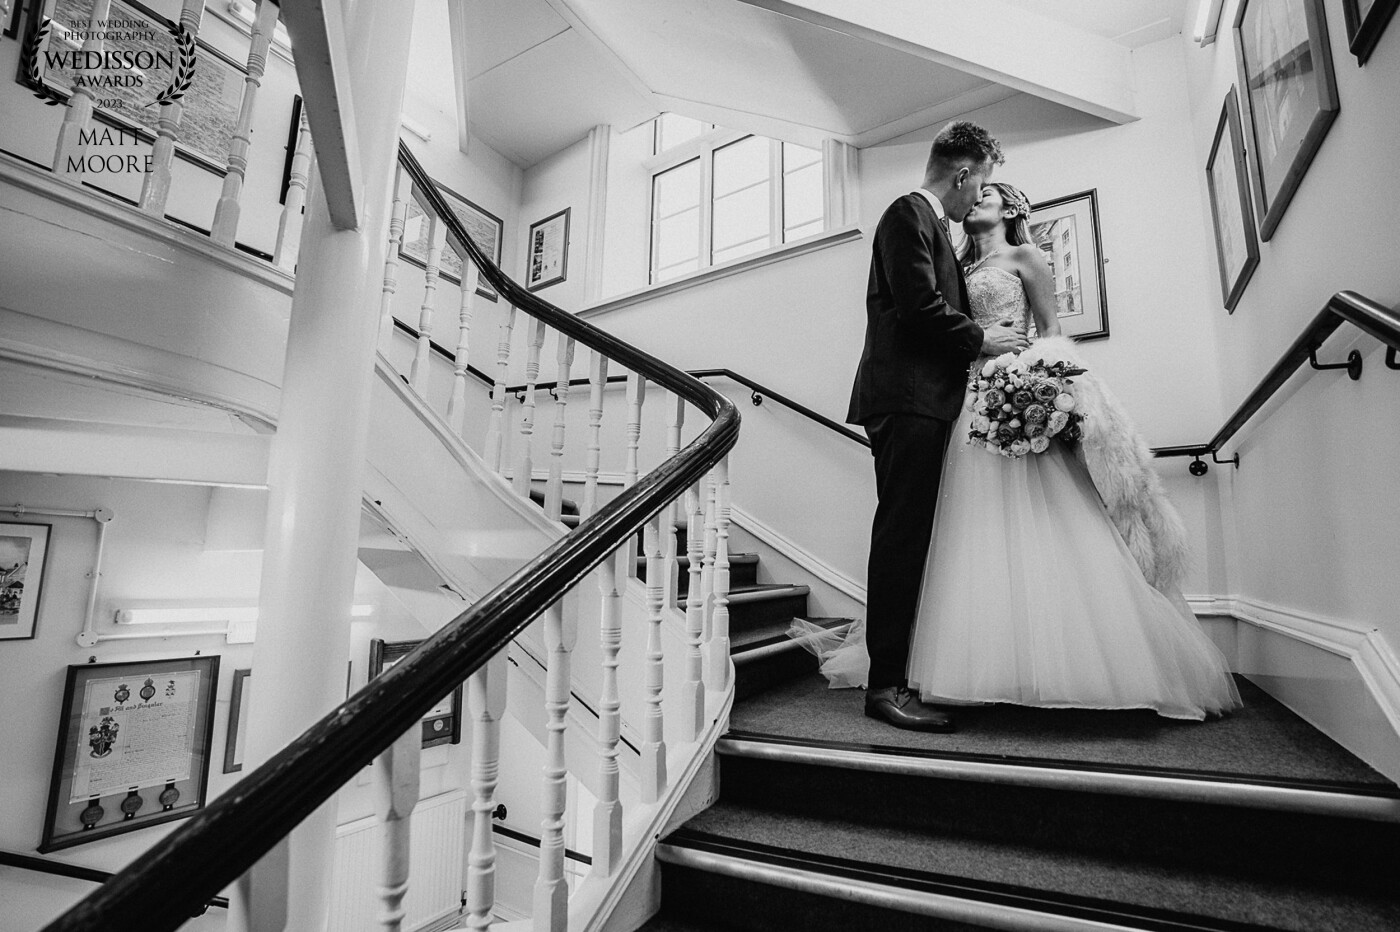 Joesph and Monica rocking the staircase at a local registry office wedding